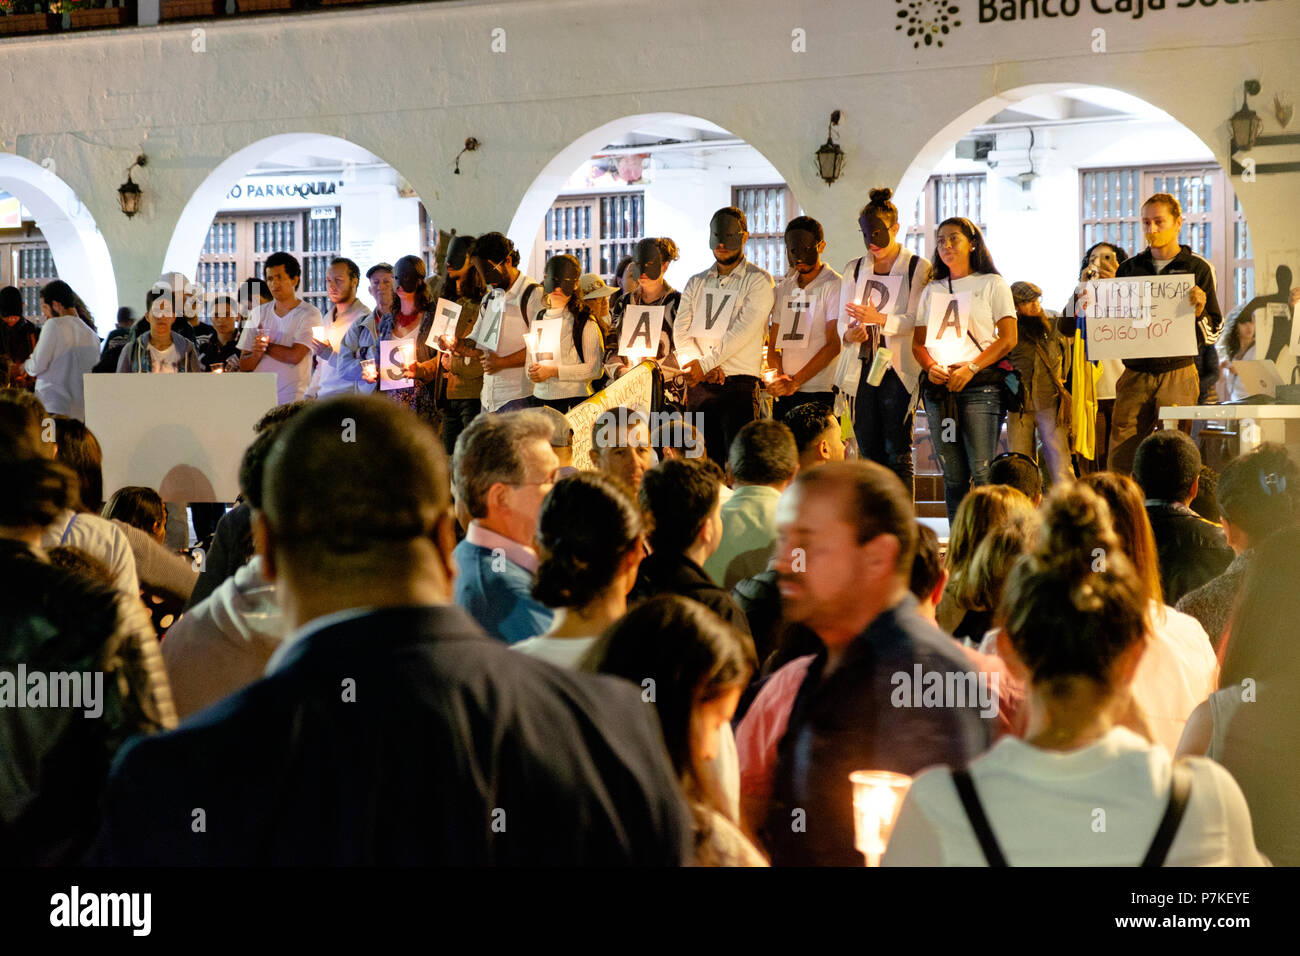 Due to a high number of social leaders killed in Colombia during the course of 2018, on Friday, July 6 people have taken the main parks in the cities to protest peacefully against these murders. A national day called 'Velatón' was summoned in which people carried candles as a symbolic act commemorating the victims. Credit: Juan Hurtado/Alamy Live News Stock Photo